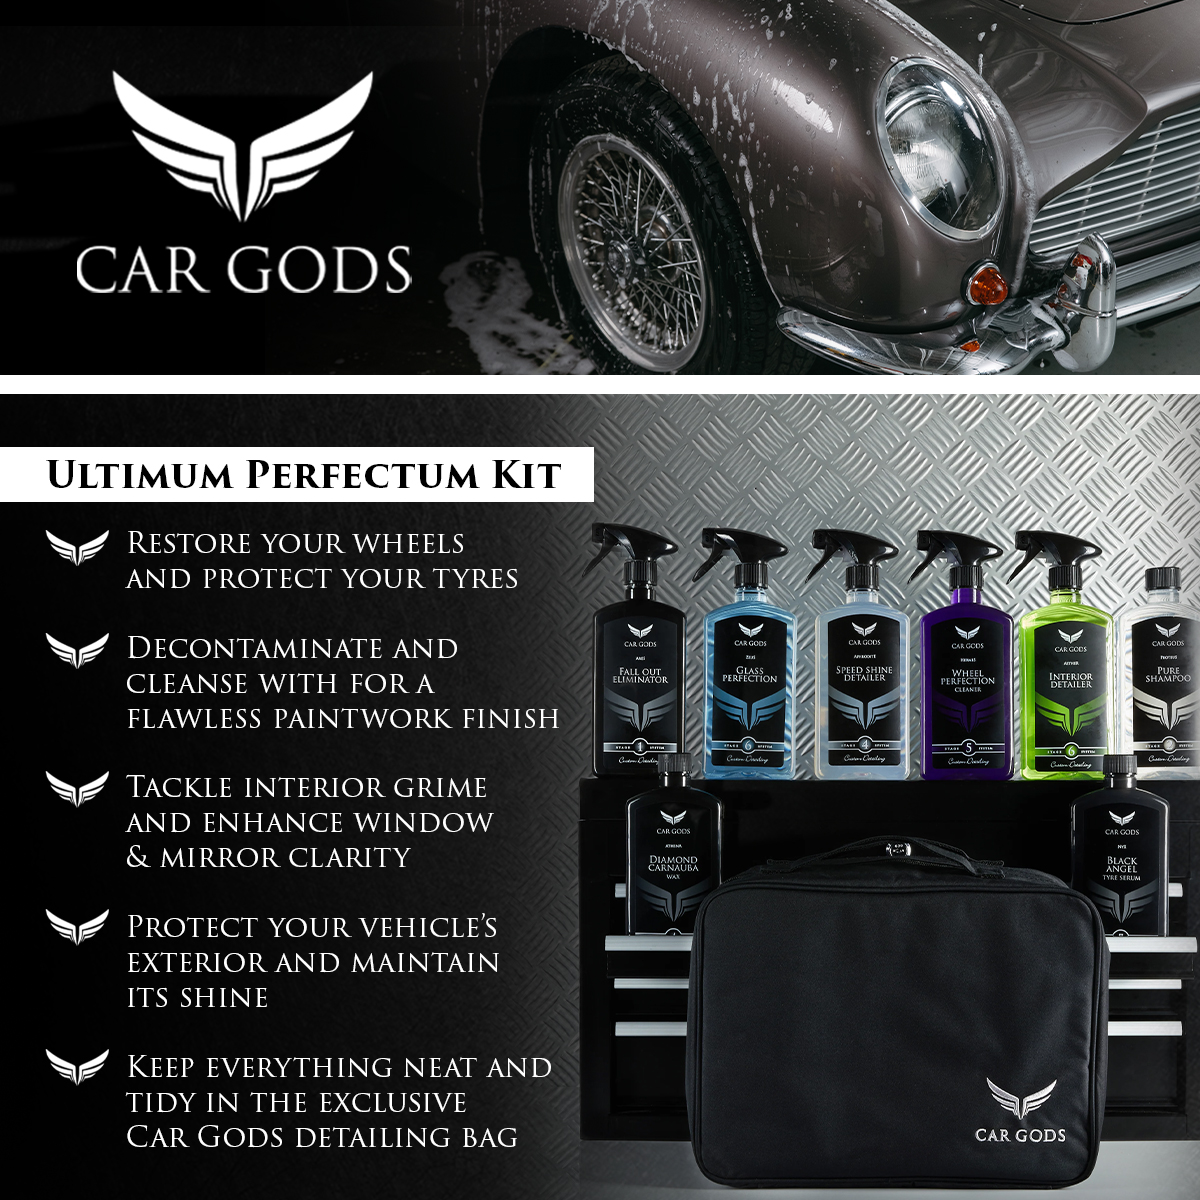 Car Gods Ultimum Perfectum Kit Use this 8-piece premium detailing kit to; restore your wheels and protect your tyres, decontaminate and cleanse with for a flawless paintwork finish, tackle interior grime and enhance window & mirror clarity, protect your vehicle’s exterior and maintain its shine for long-lasting brilliance, and keep everything neat and tidy in the exclusive Car Gods detailing bag.